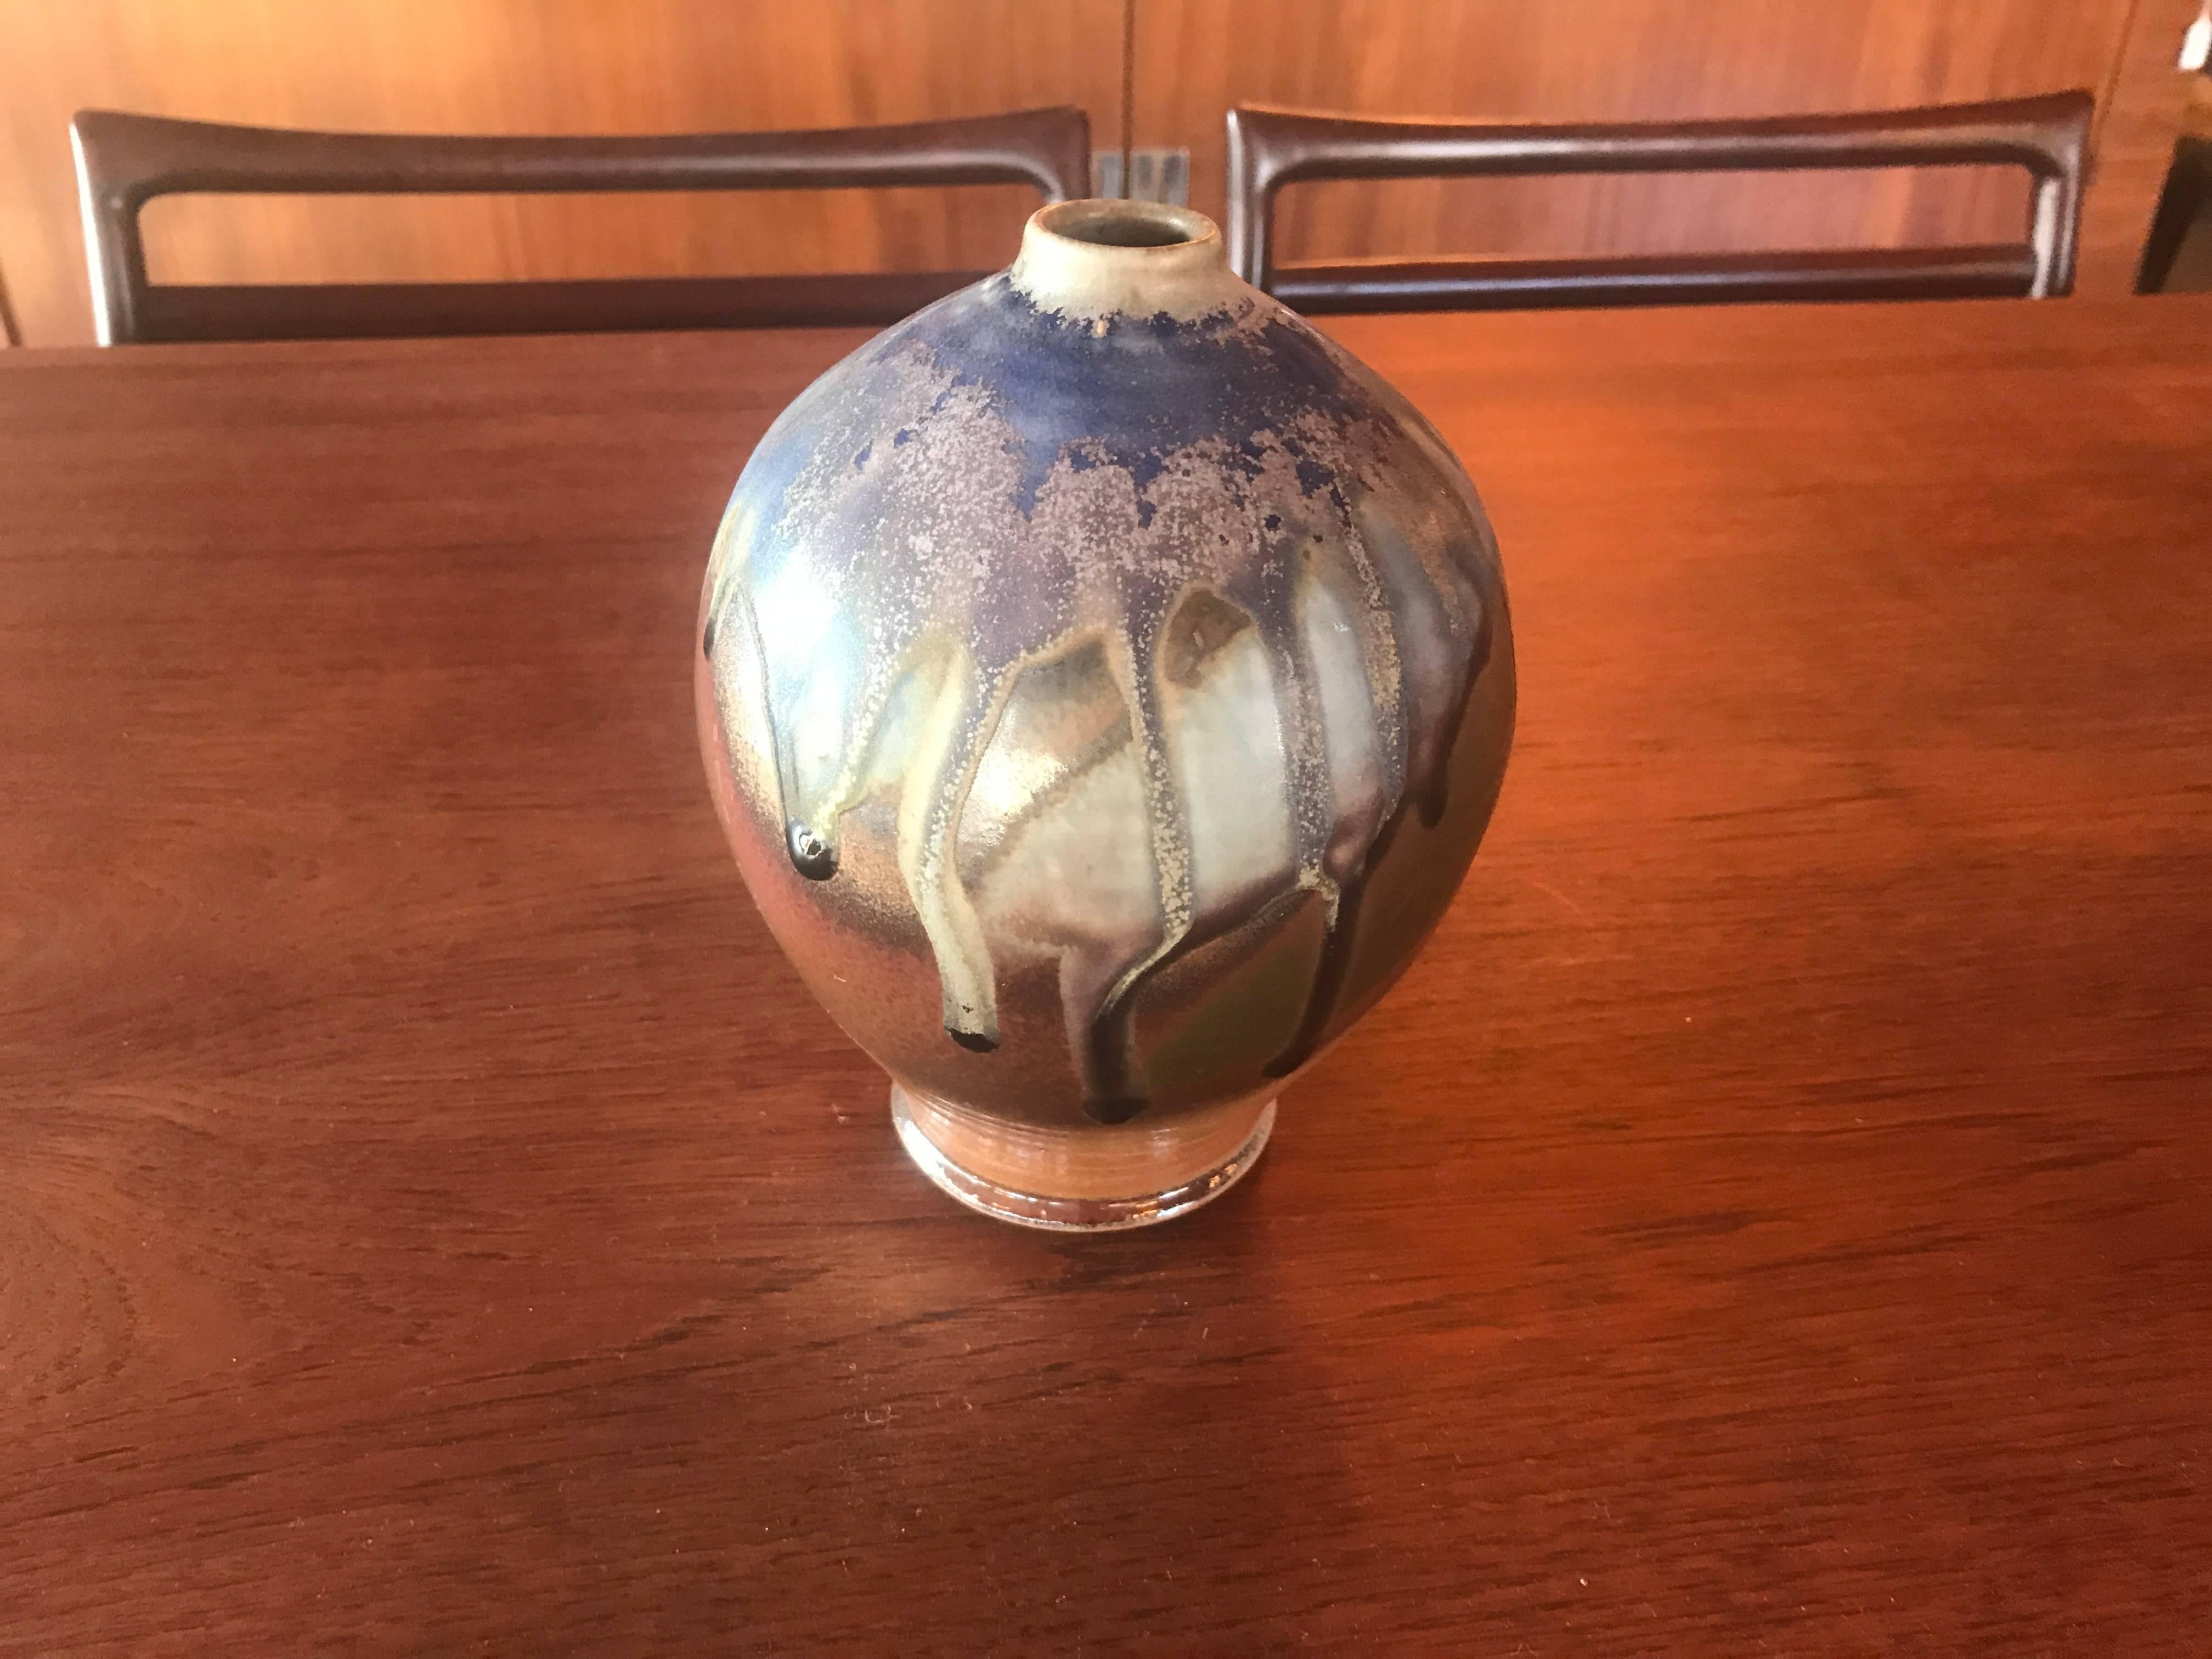 Vintage Midcentury Studio Ceramic Weed Pot Pottery Vase Art Abstract Sculpture In Excellent Condition For Sale In Salt Lake City, UT